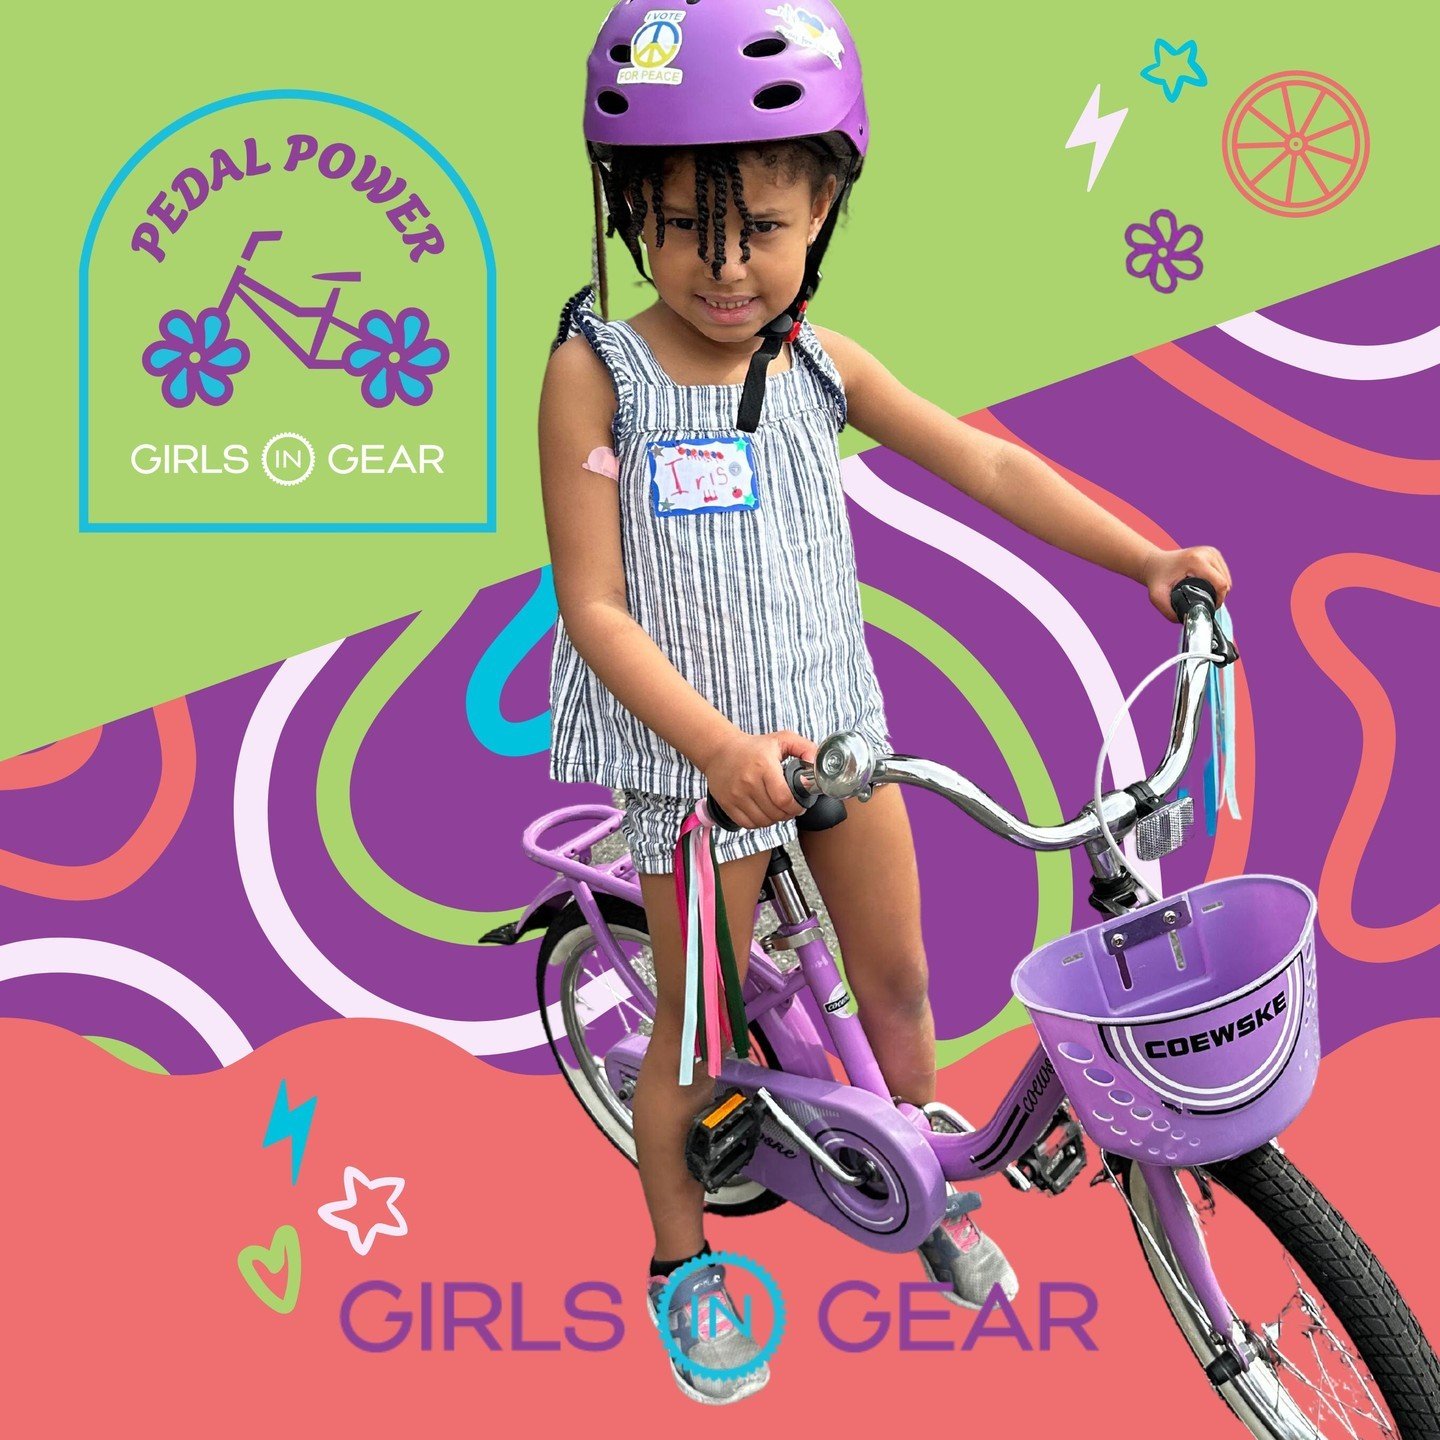 May is Bike Month! To celebrate, join us in raising money to ensure that every girl has the chance to bike safely and confidently through life. Pedal Power, Girls in Gear's annual fundraiser, is back and gearing up to empower more girls through the p